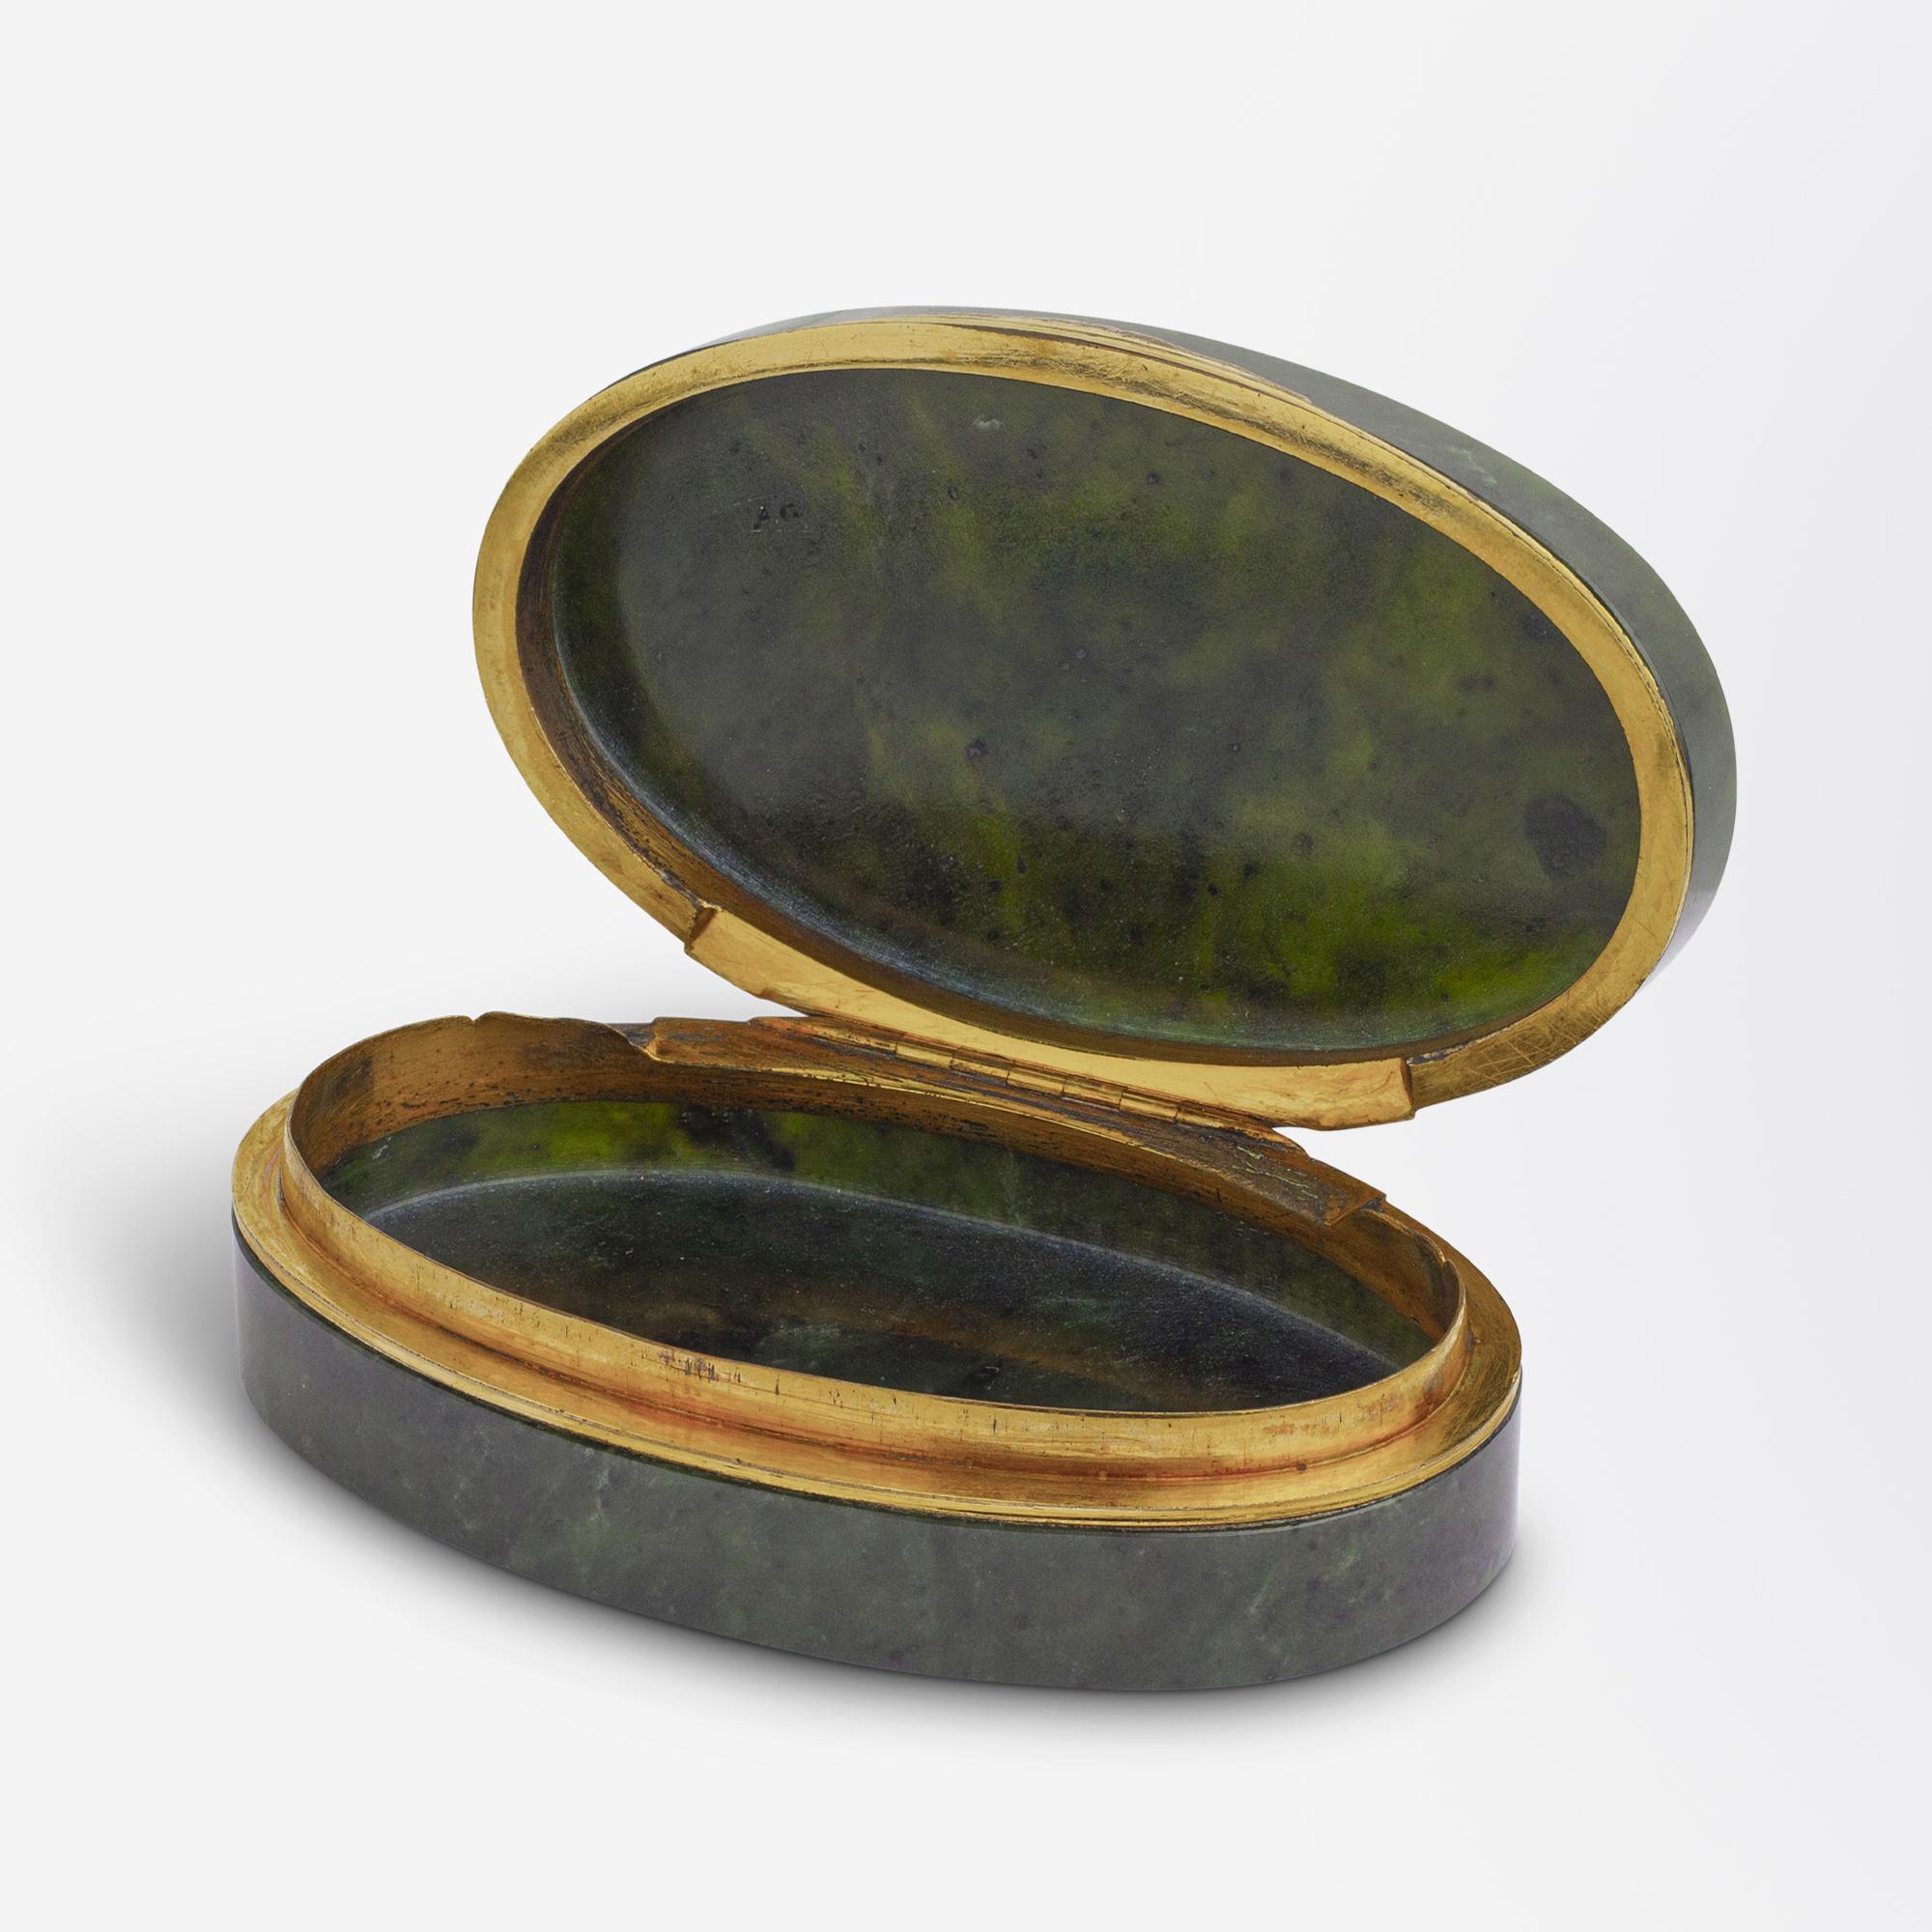 This spinach jade and gilt metal box dates to the Turn of The Century and was likely crafted in Russia. The box which has a look and feel similar to Faberge would have likely been crafted during the end of the imperial period in Russia. The piece